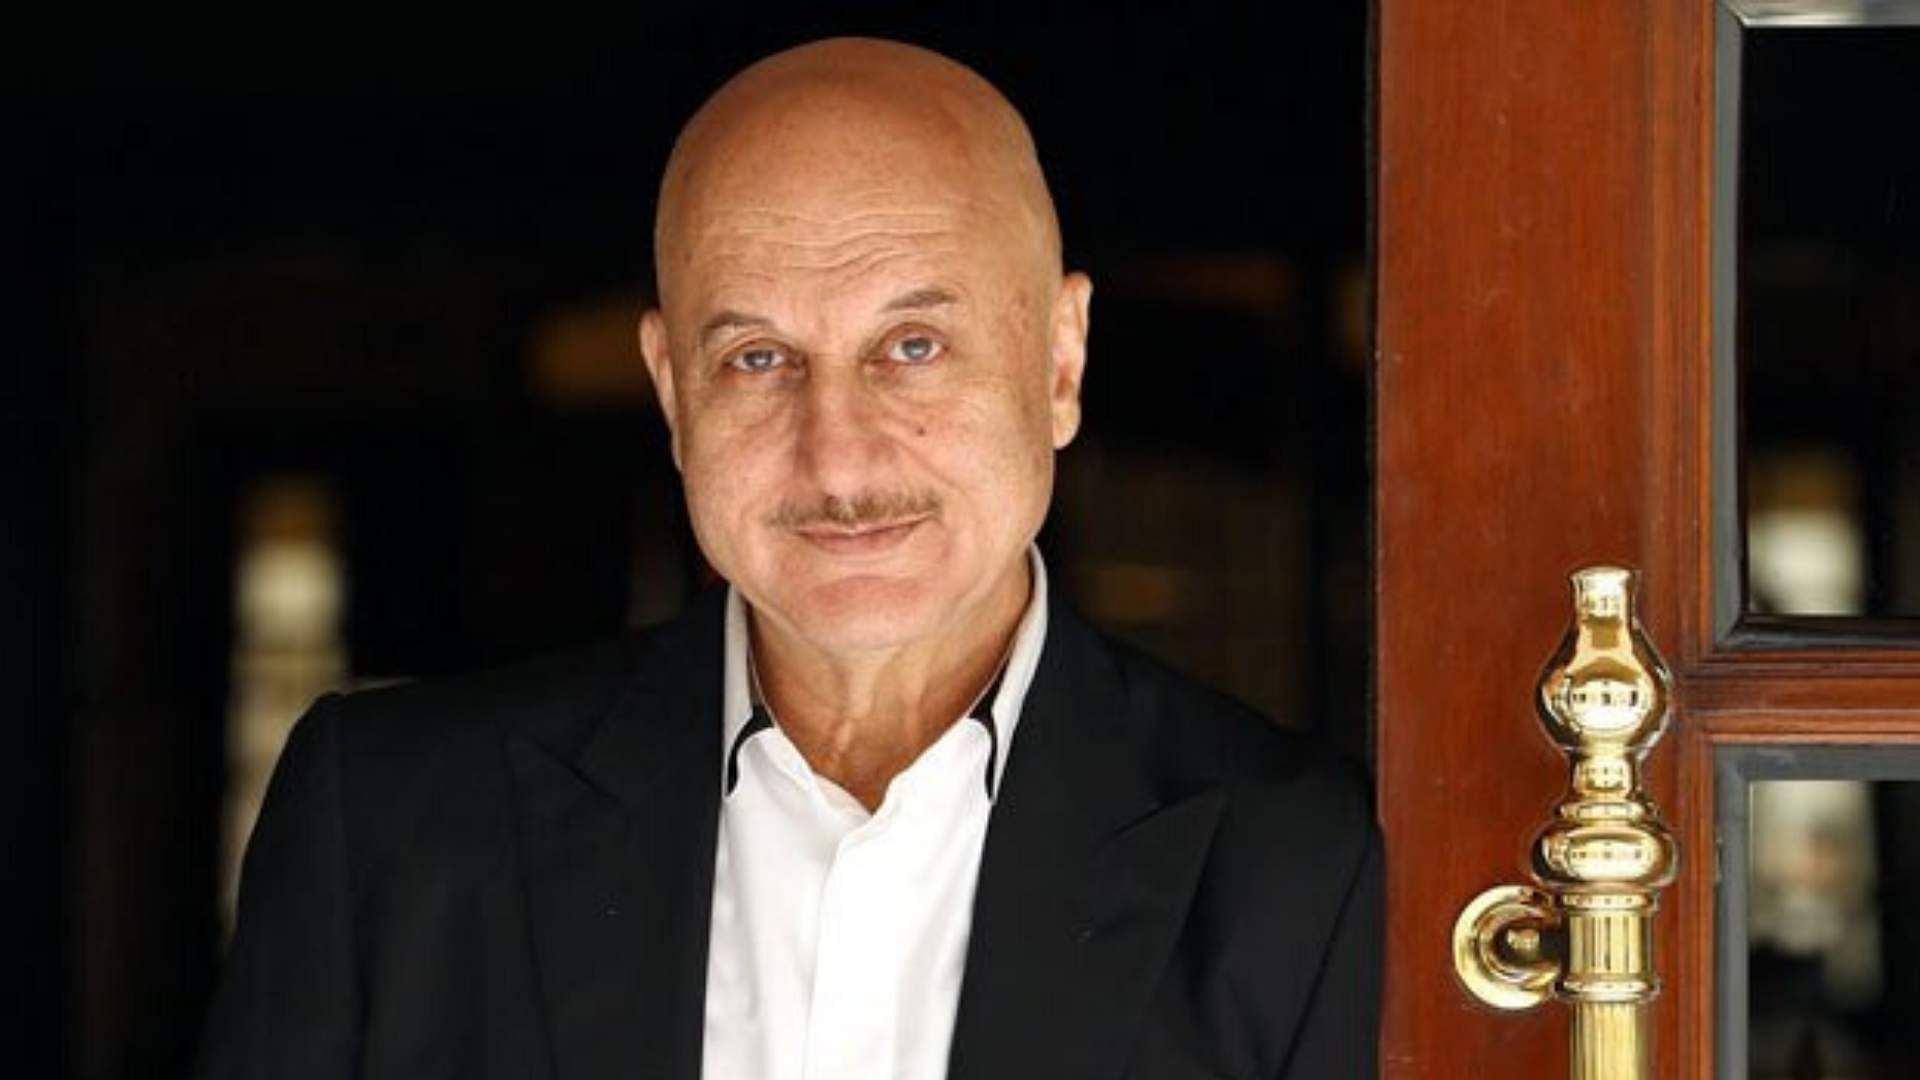 Anupam Kher has suggested greeting people with a namaste rather than a handshake to avoid the spread of coronavirus.